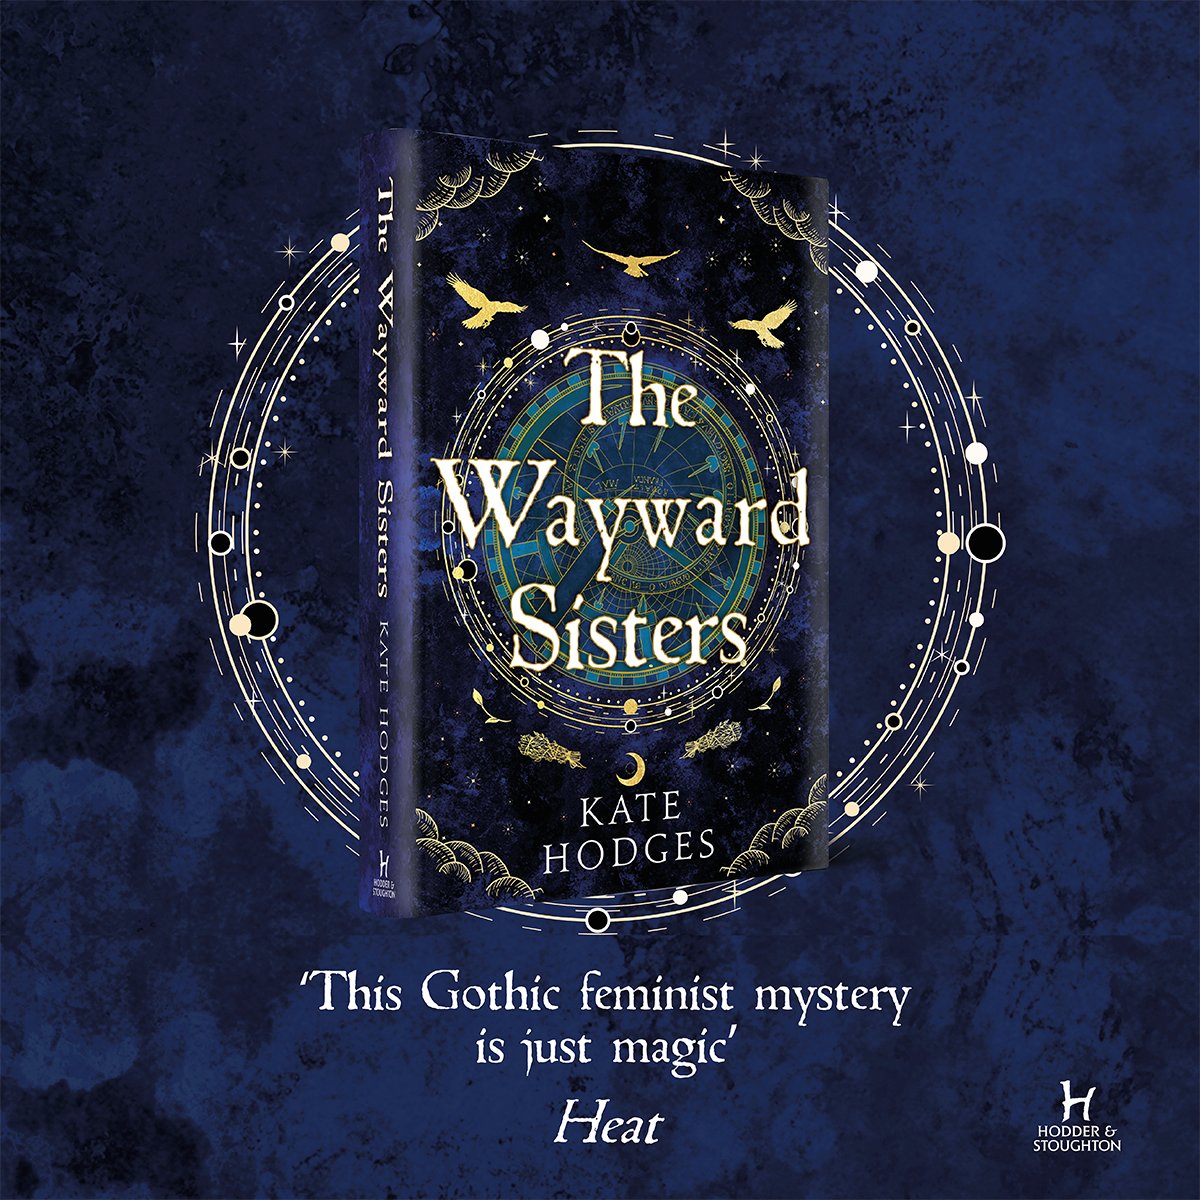 The great quotes for THE WAYARD SISTERS by @TheeKateHodges just keep on rolling in! Here’s the latest from Heat: ‘This Gothic feminist mystery is just magic.’ If that appeals, why not pick up a copy of the beautiful hardback – out now from @HodderBooks: uk.bookshop.org/p/books/the-wa…